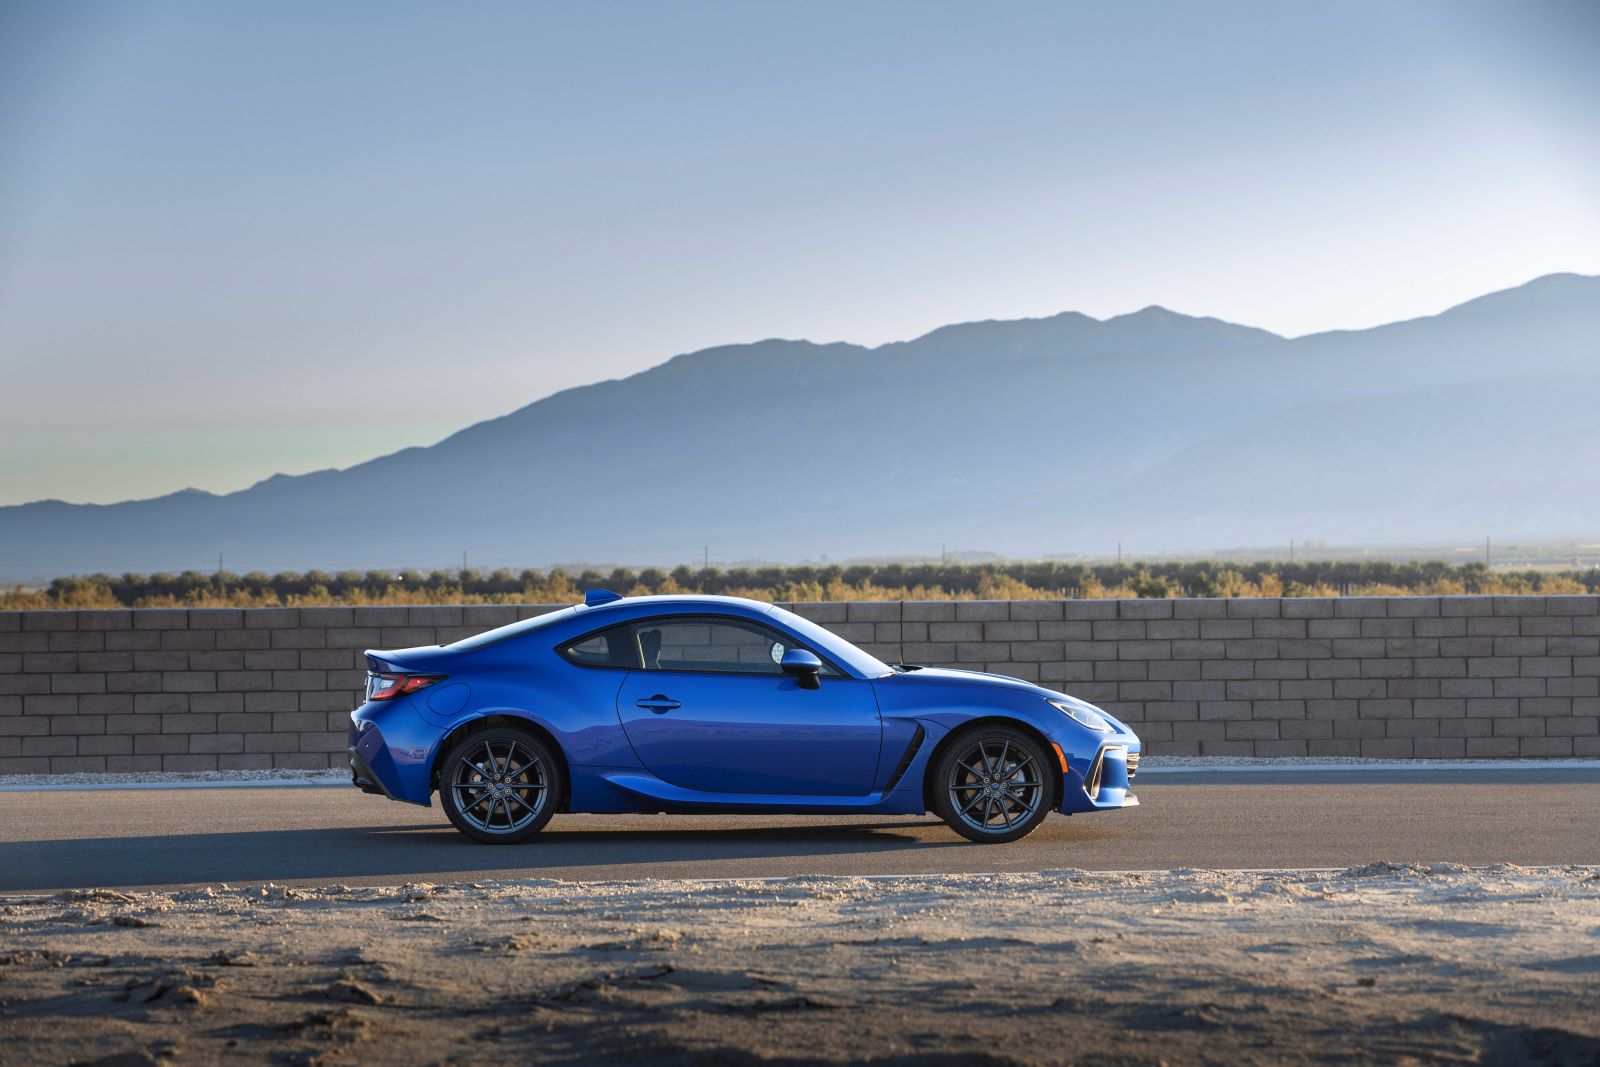 Side profile of a blue 2022 Subaru BRZ coupe, trim level uncertain, parked on a dirt road against the backdrop of sprawling mountains